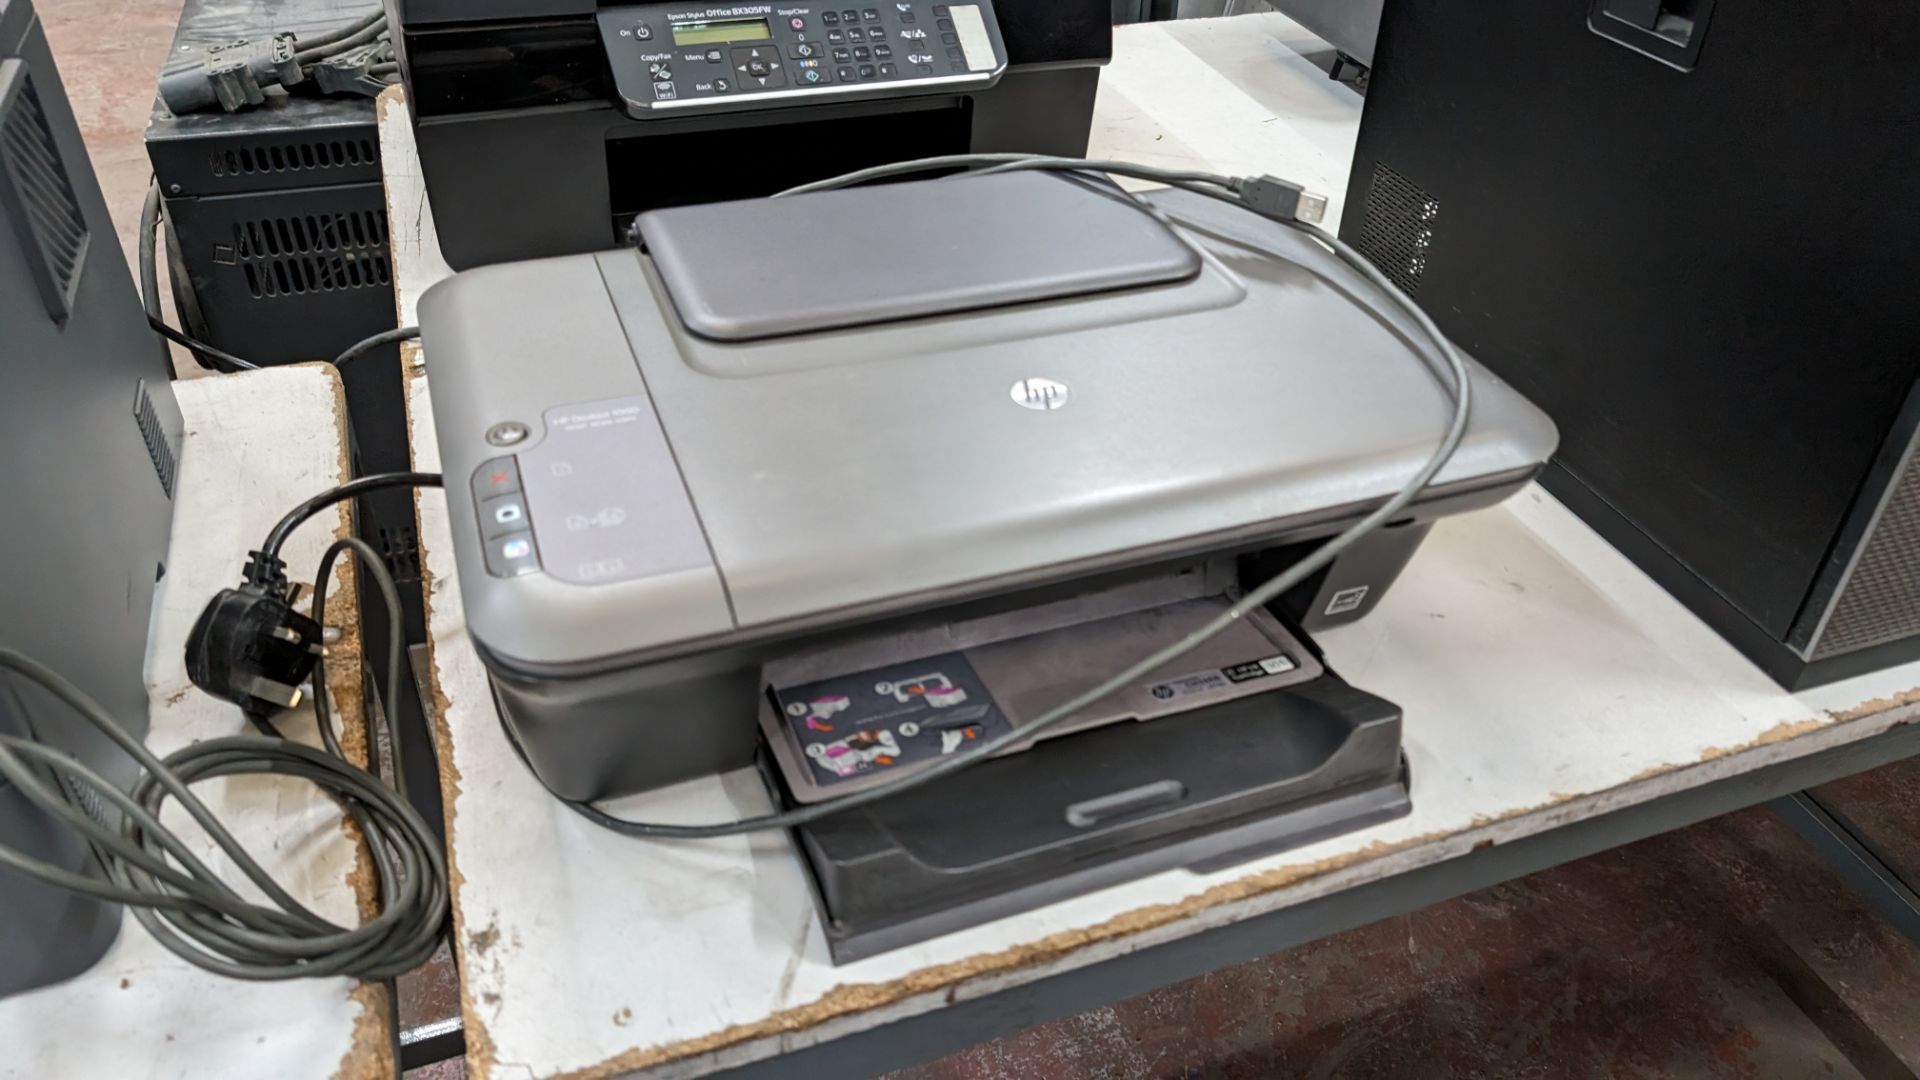 3 off assorted printers by Brother, HP and Epson - Image 3 of 6